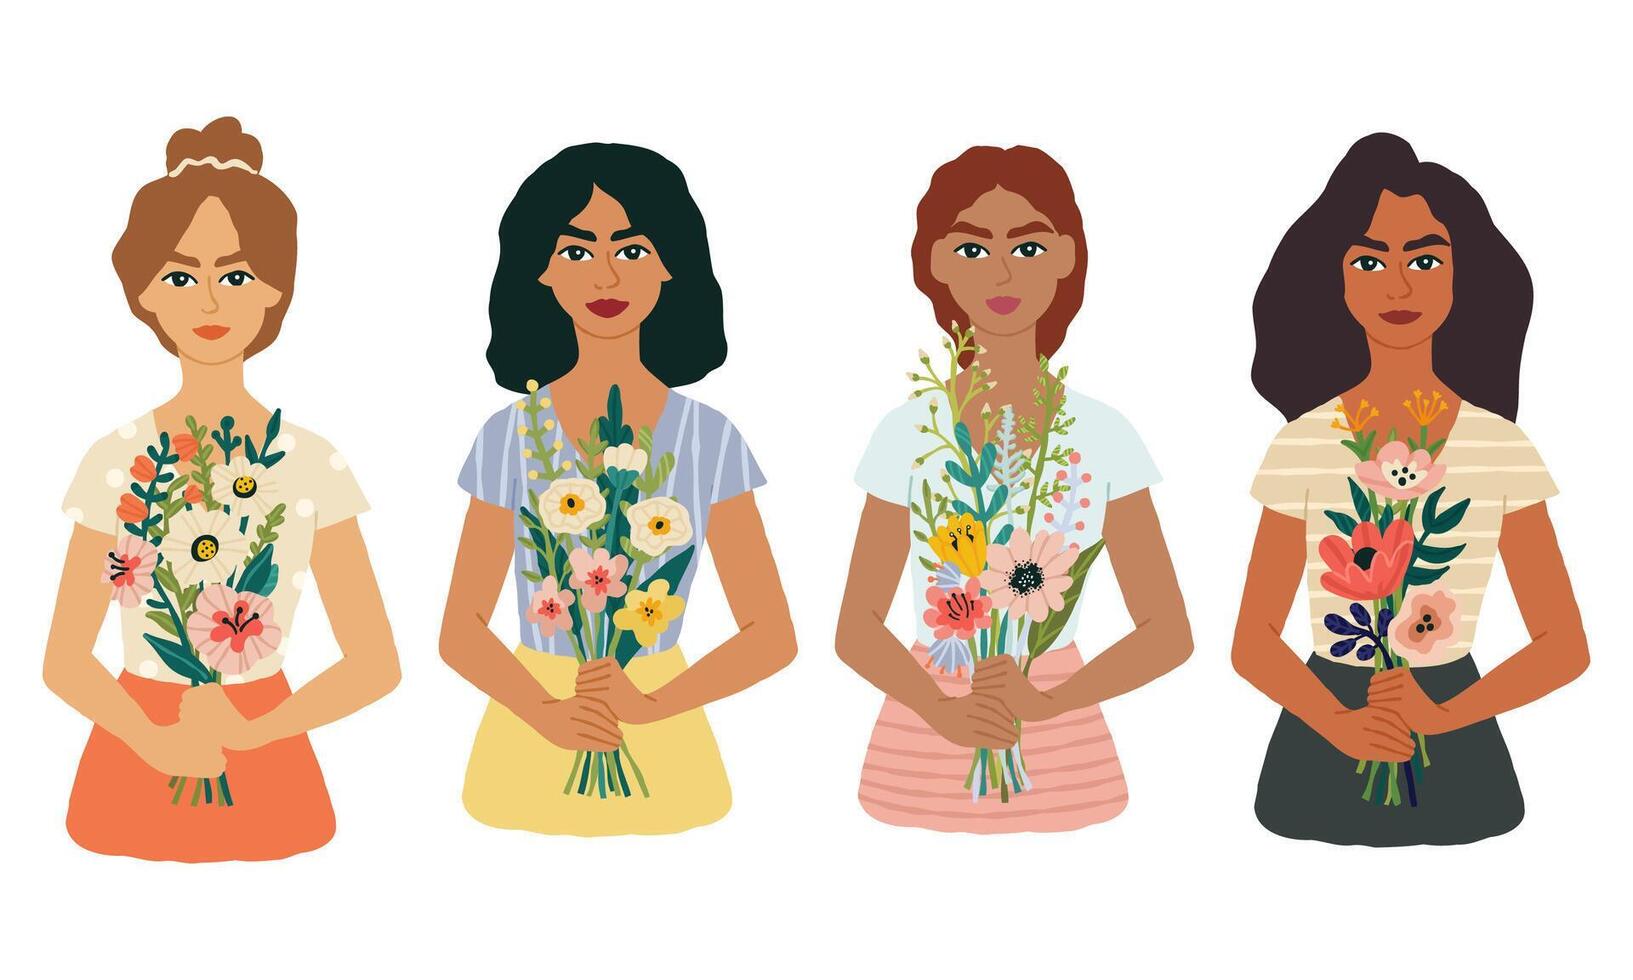 Spring set with girls with bouquets in hands. Women different nationalities holding flowers. Hand drawn flat cartoon elements. Vector illustration